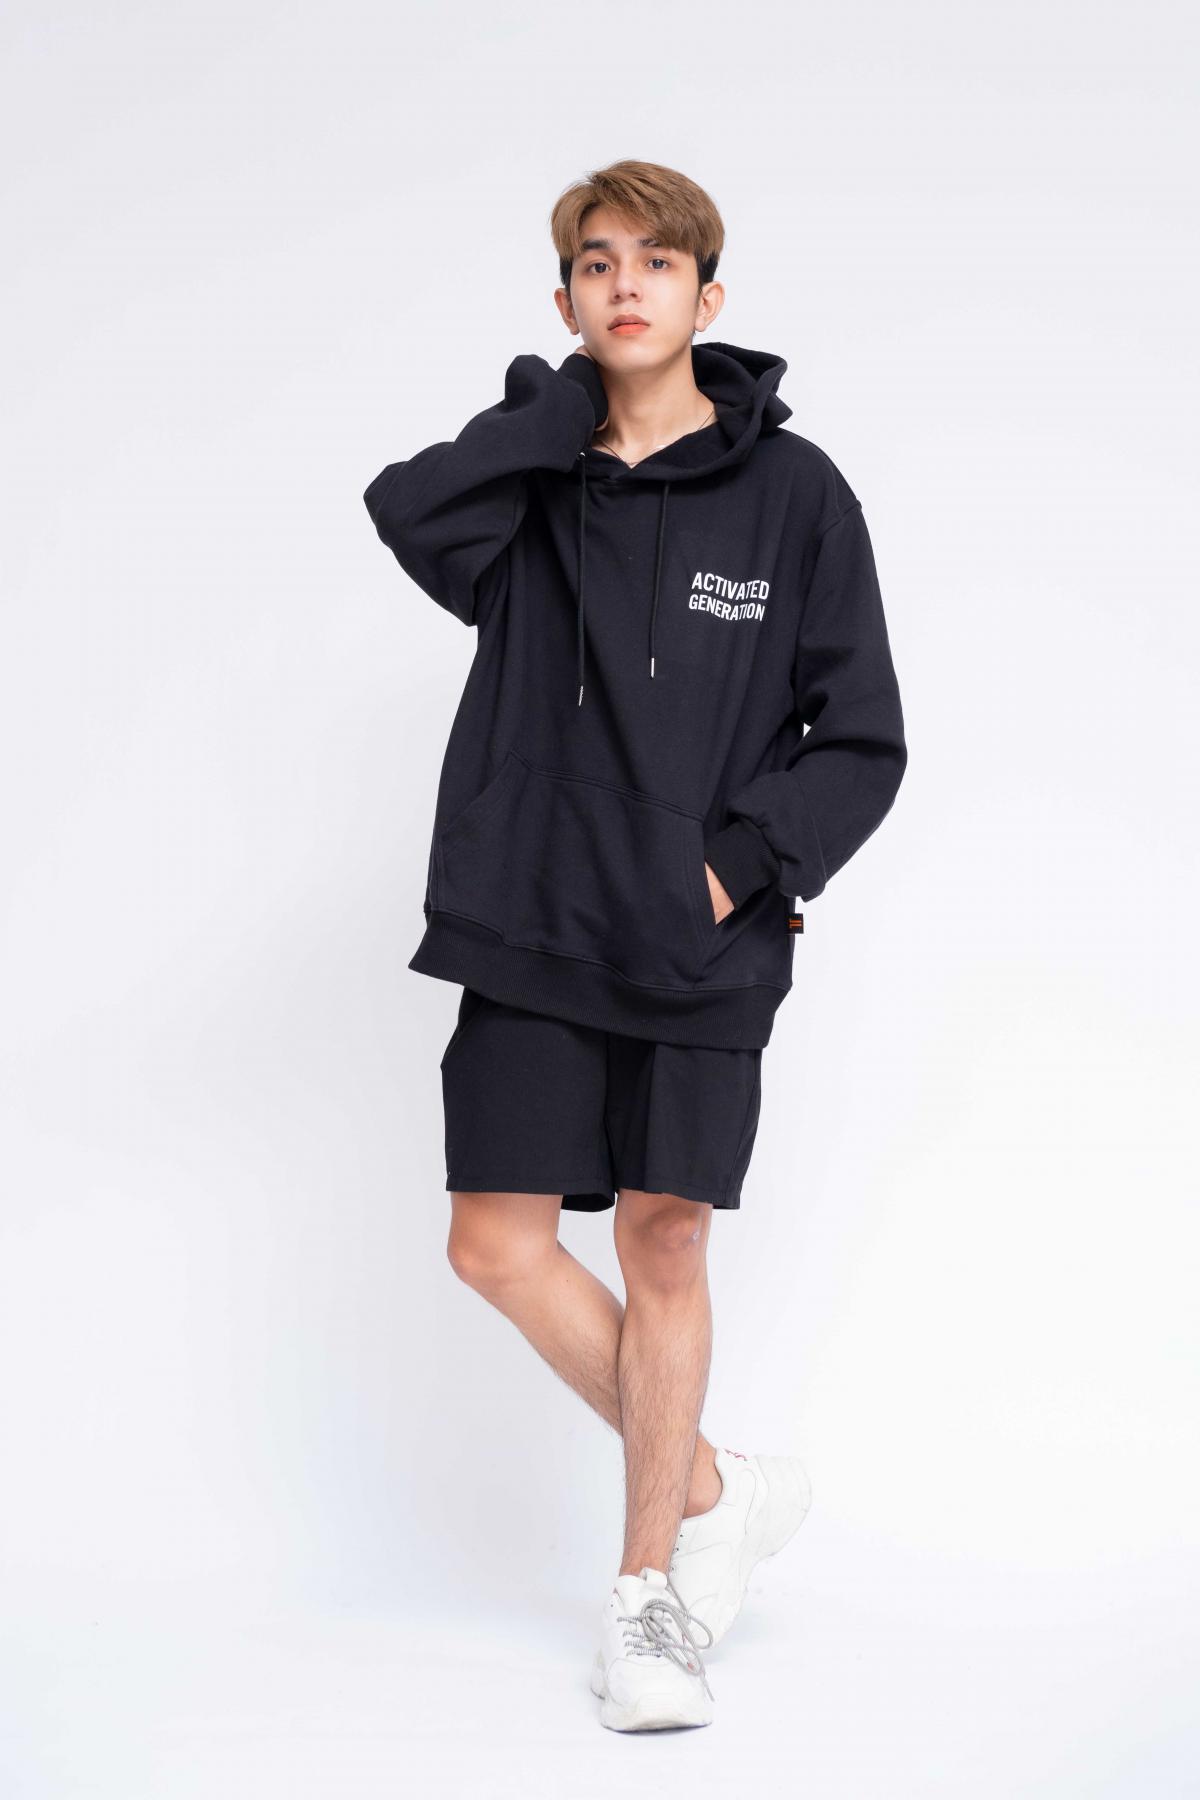 Hoodie Oversized Nam Activated Generation #3